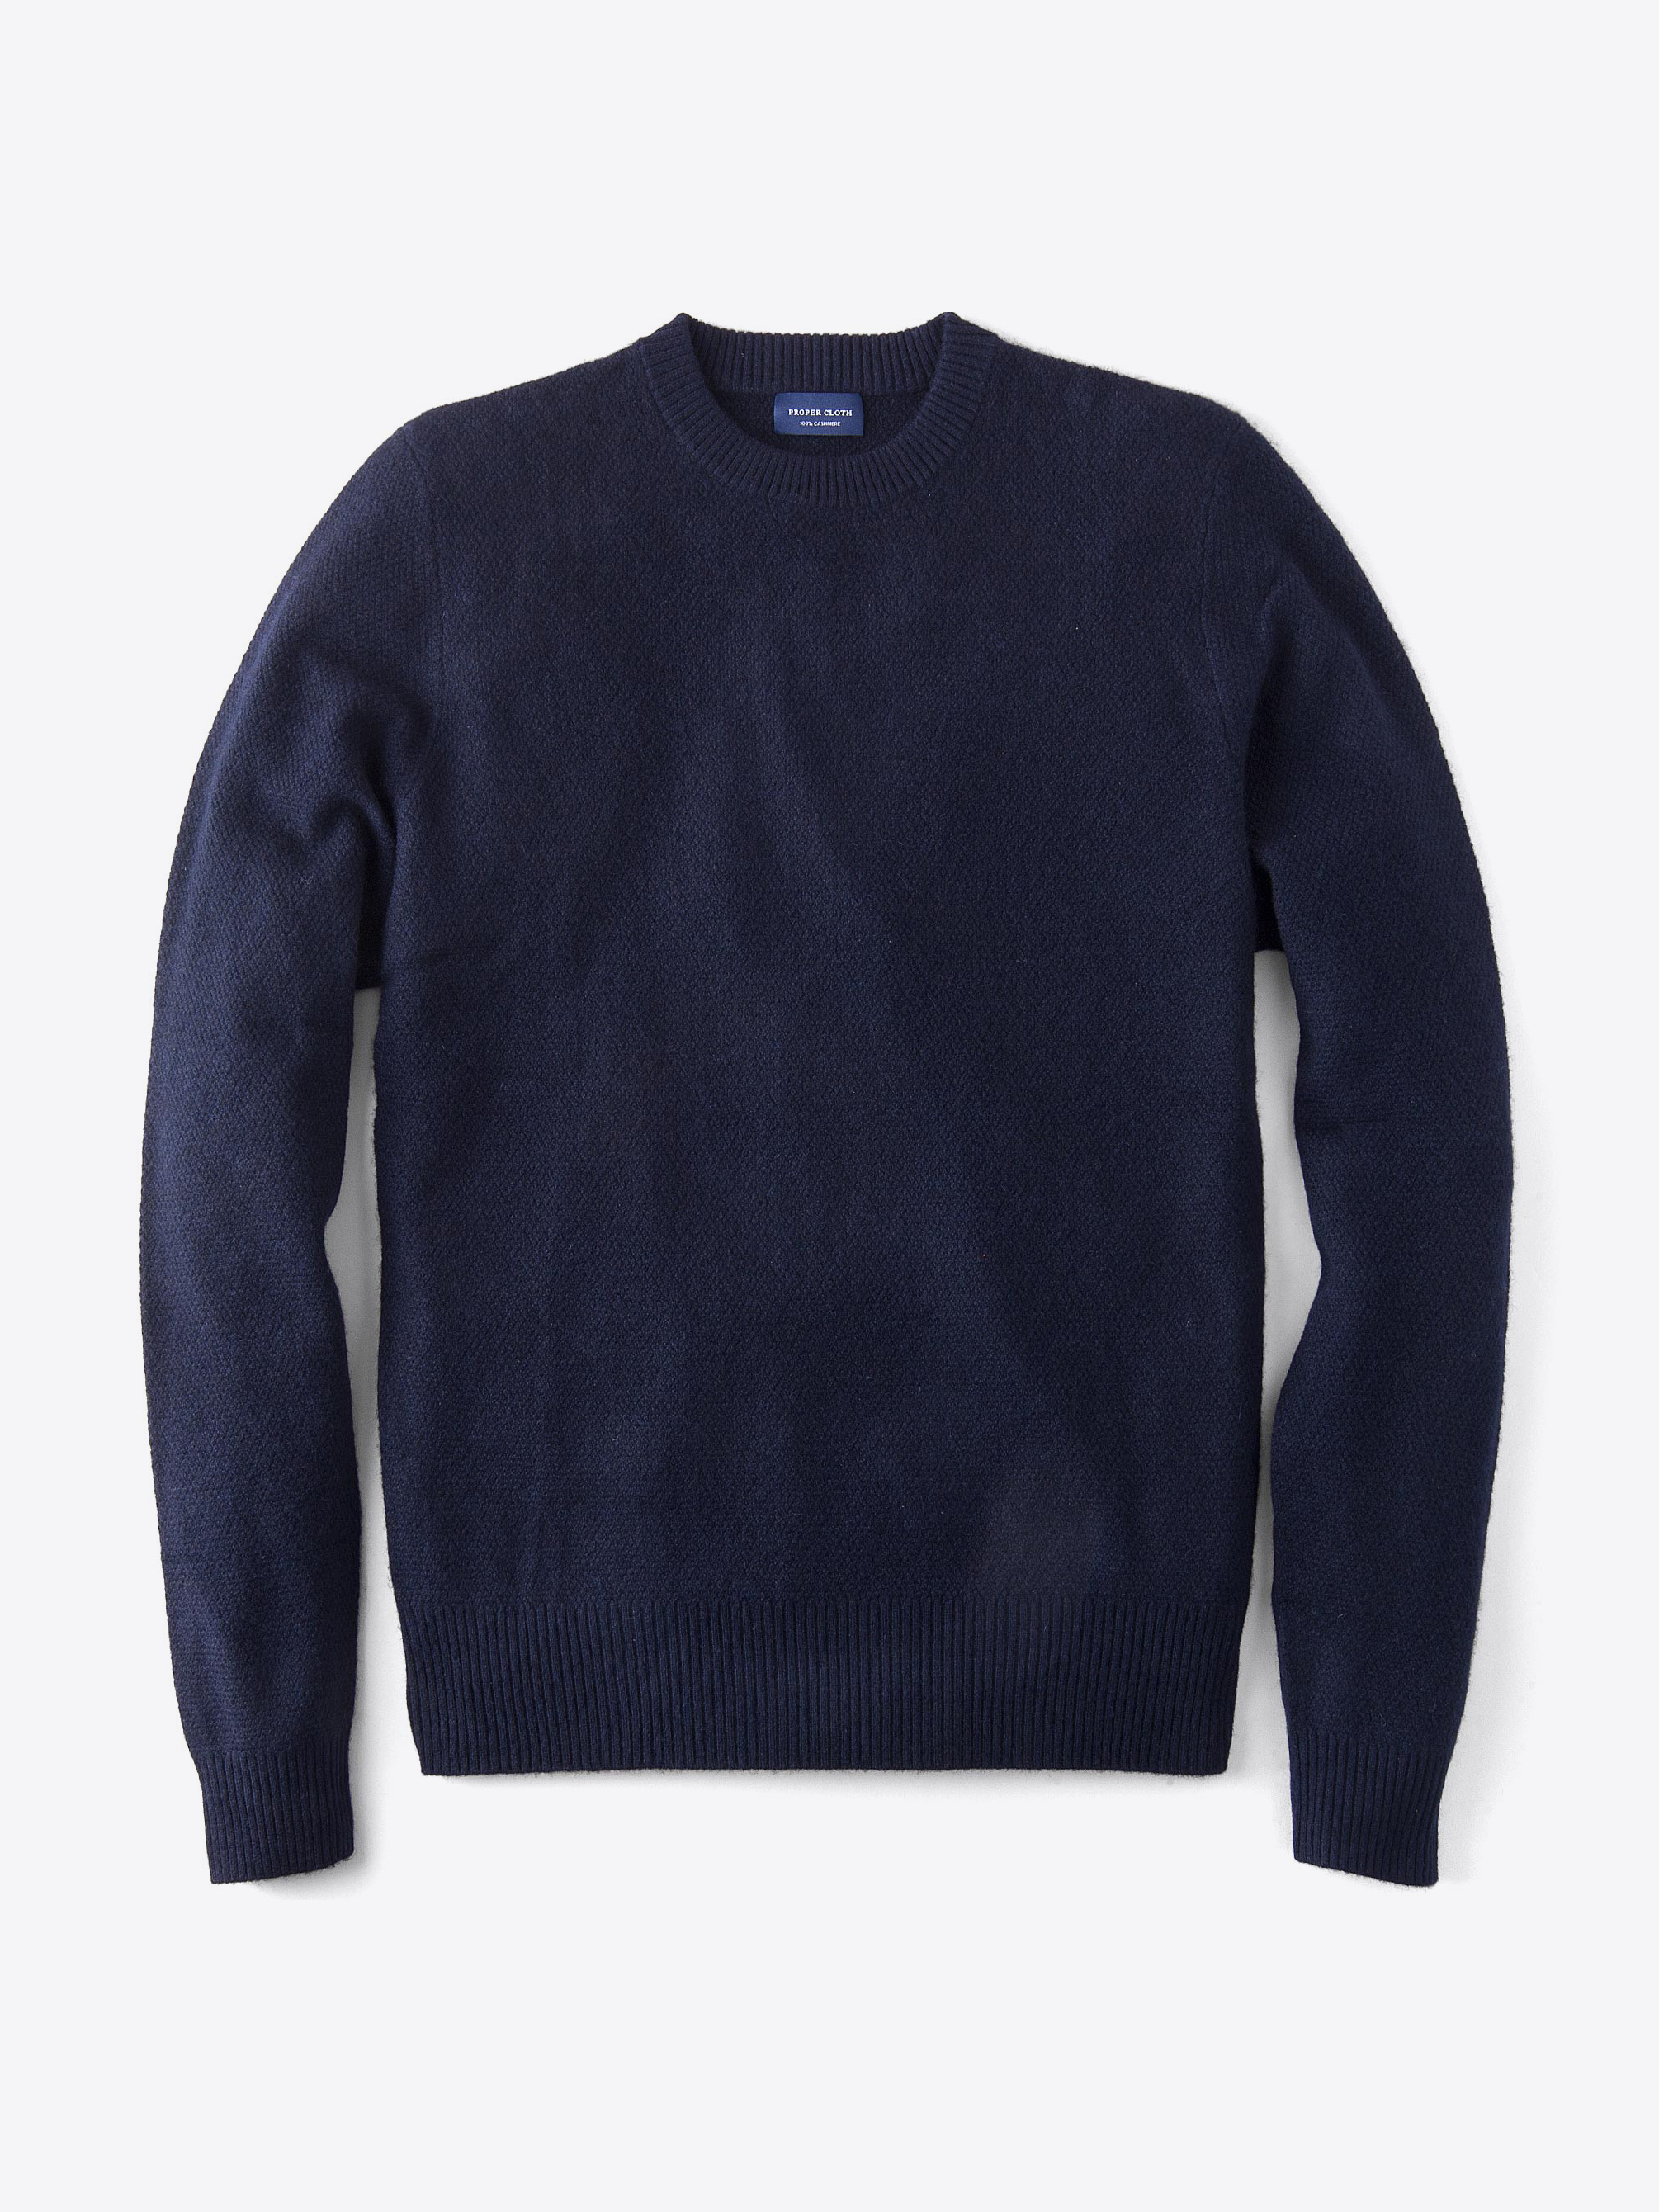 Zoom Image of Navy Cobble Stitch Cashmere Sweater